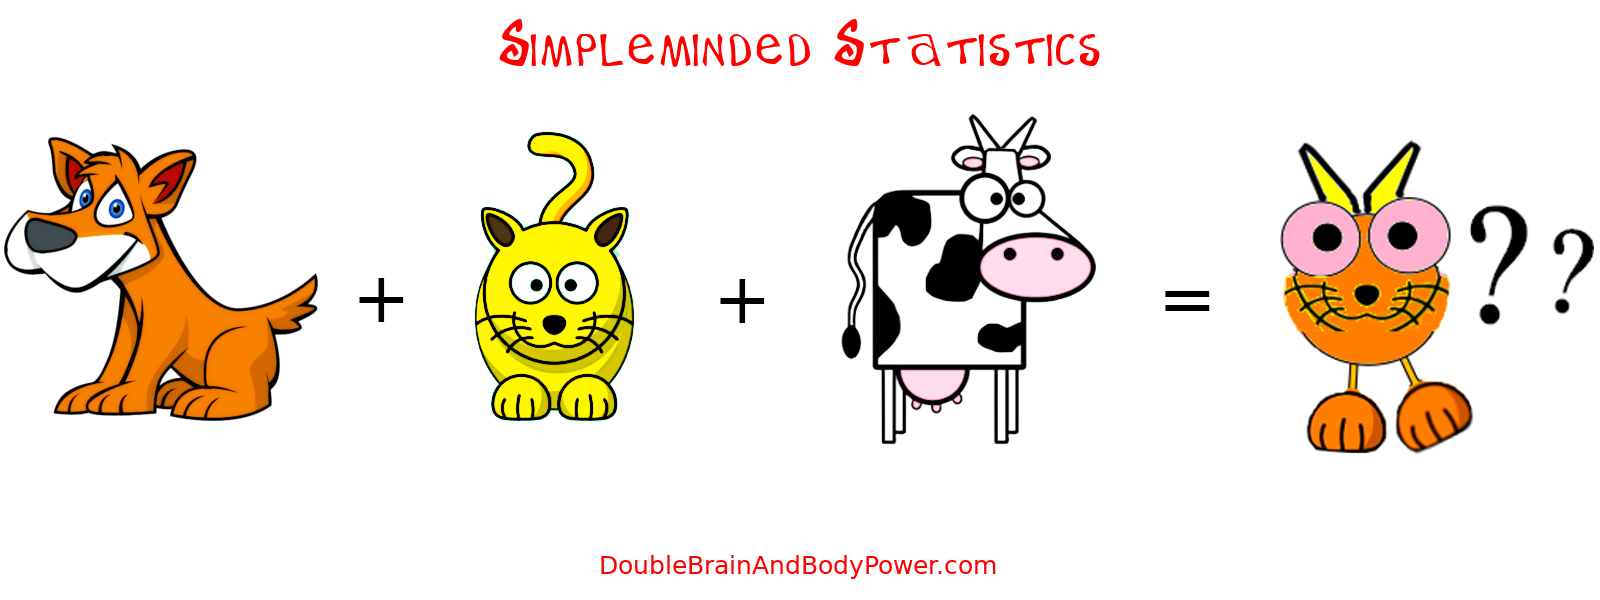 Cartoon with the title Simpleminded Statistics. It has drawings of a brown dog, a yellow cat, and a white cow with black spots. They are added up with plus signs to equal a weird looking creature. Question marks ask if the creature is really an average of all three animals.